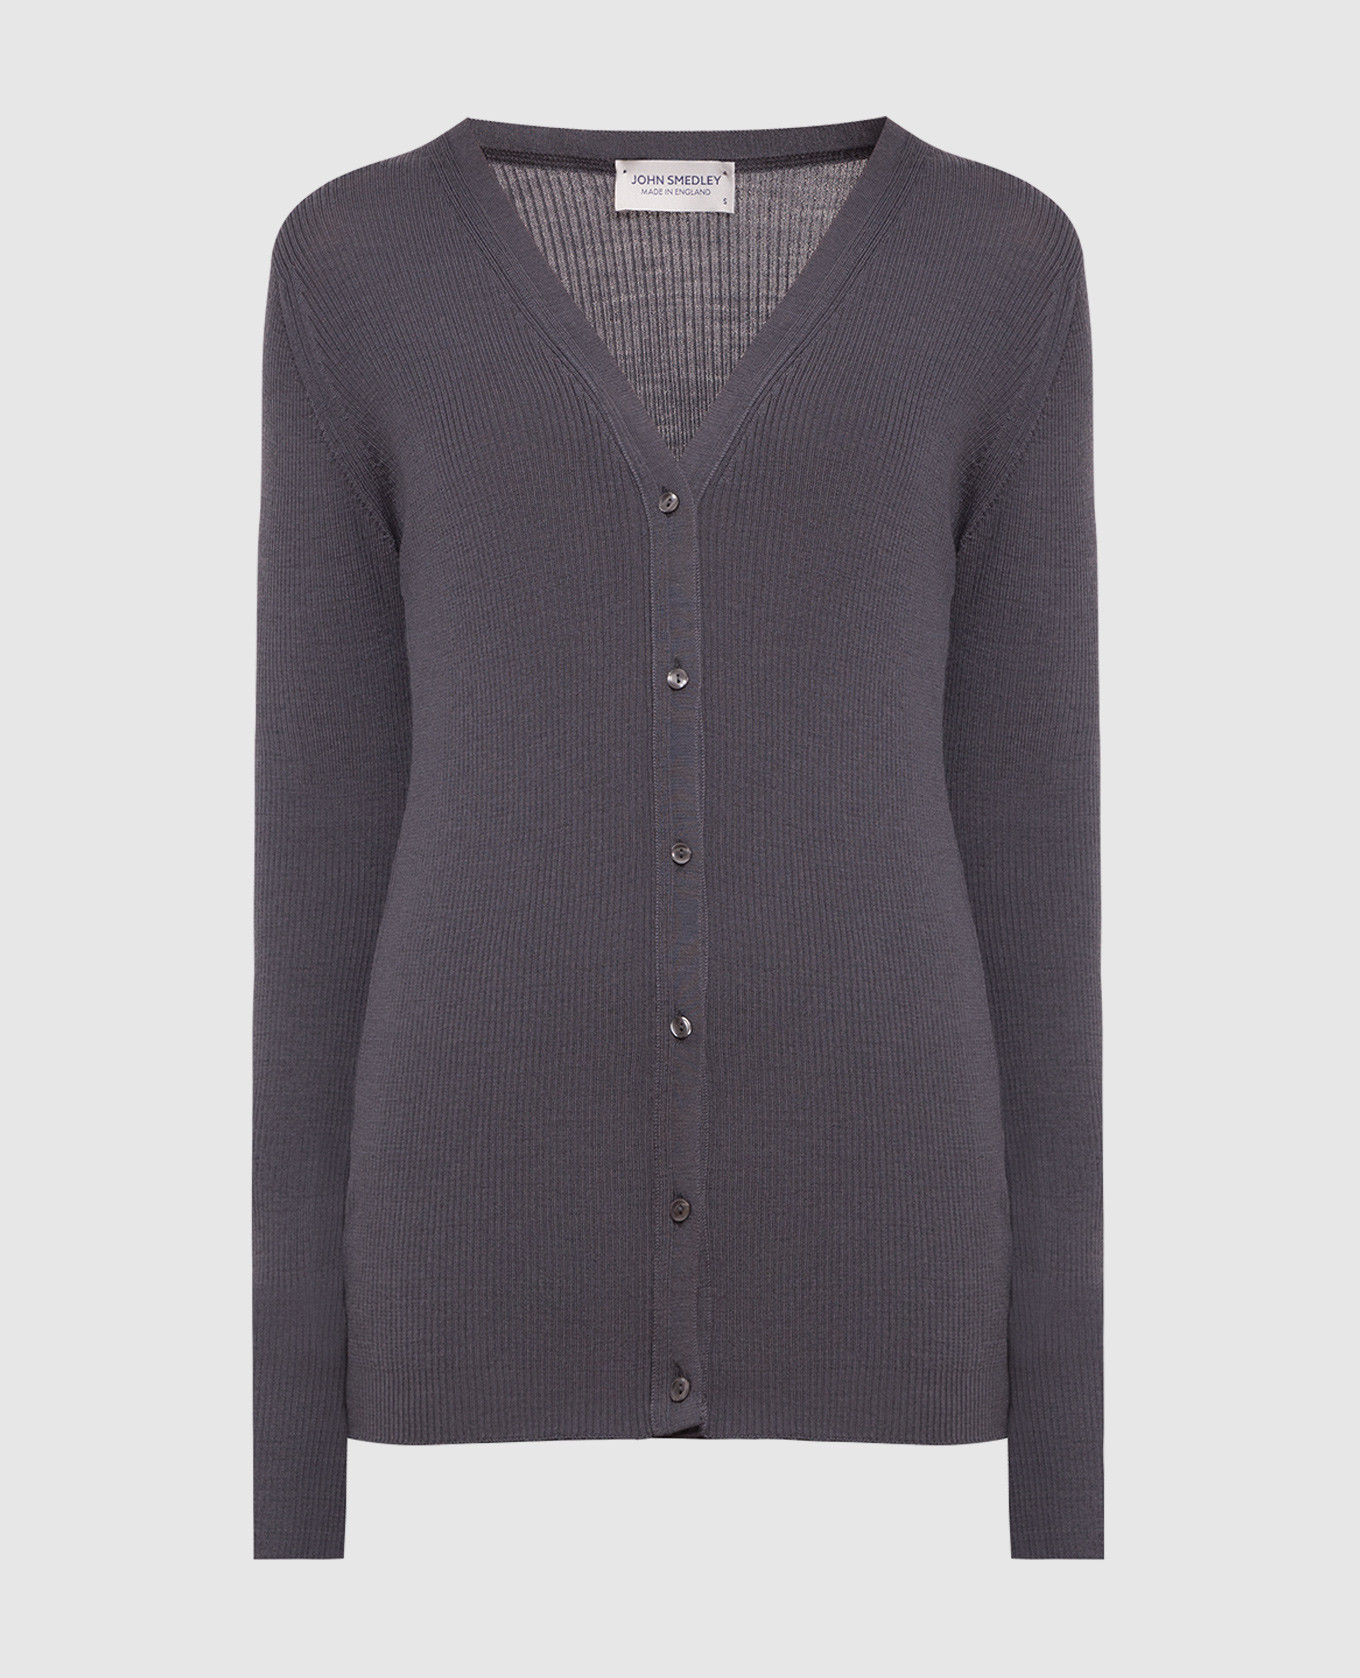 Lasca cardigan in charcoal ribbed wool